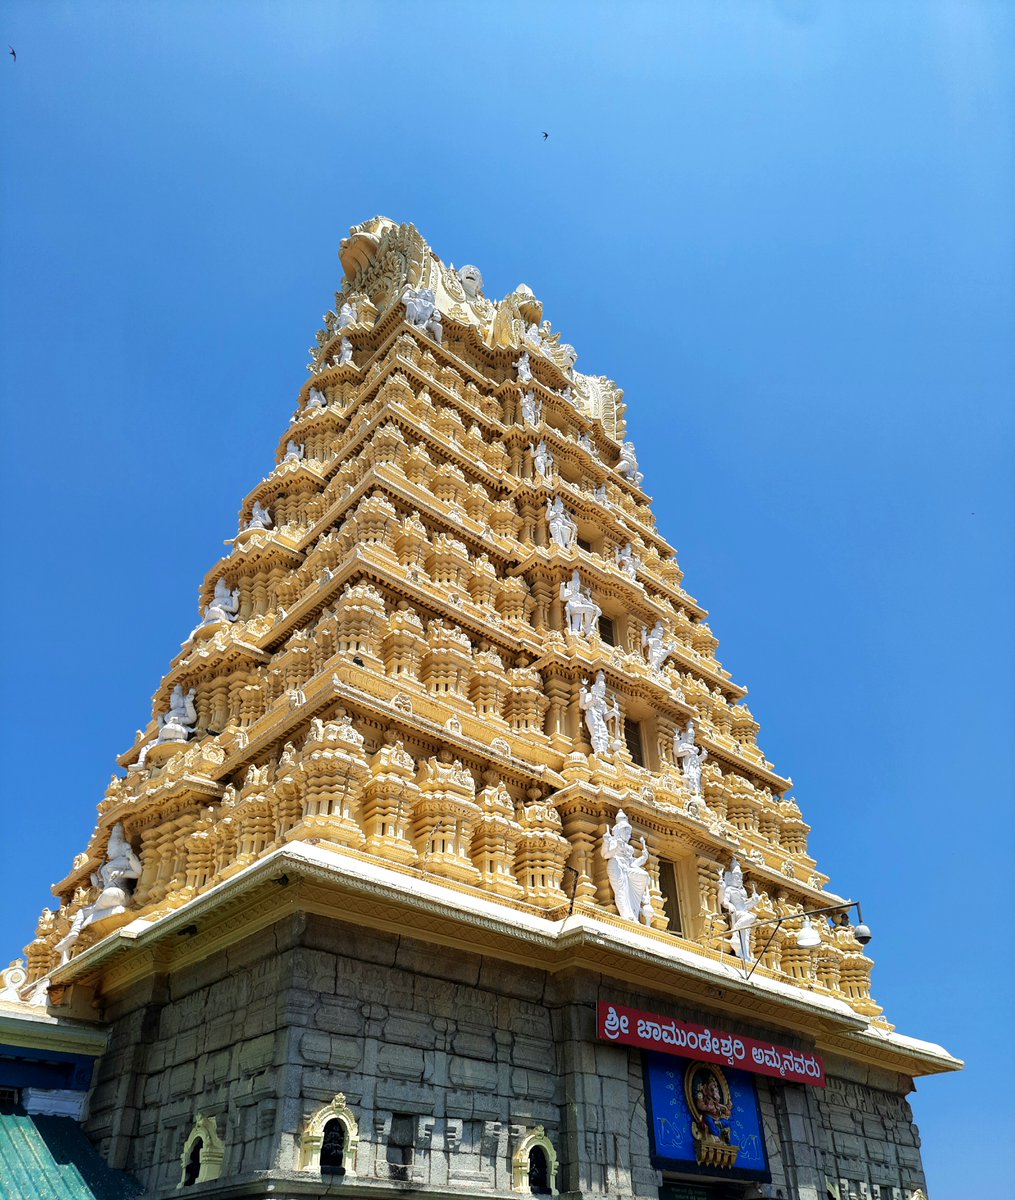 Chamundeshwari Temple, a prominent Hindu temple located on the top of Chamundi Hills about 13 km from the palace city of Mysuru, India. The Chamundeshwari Temple is considered as one among the 18 Shakti Peethas. #letsgoeverywhere #travel #wanderlust #lovetotravel #nature #temple